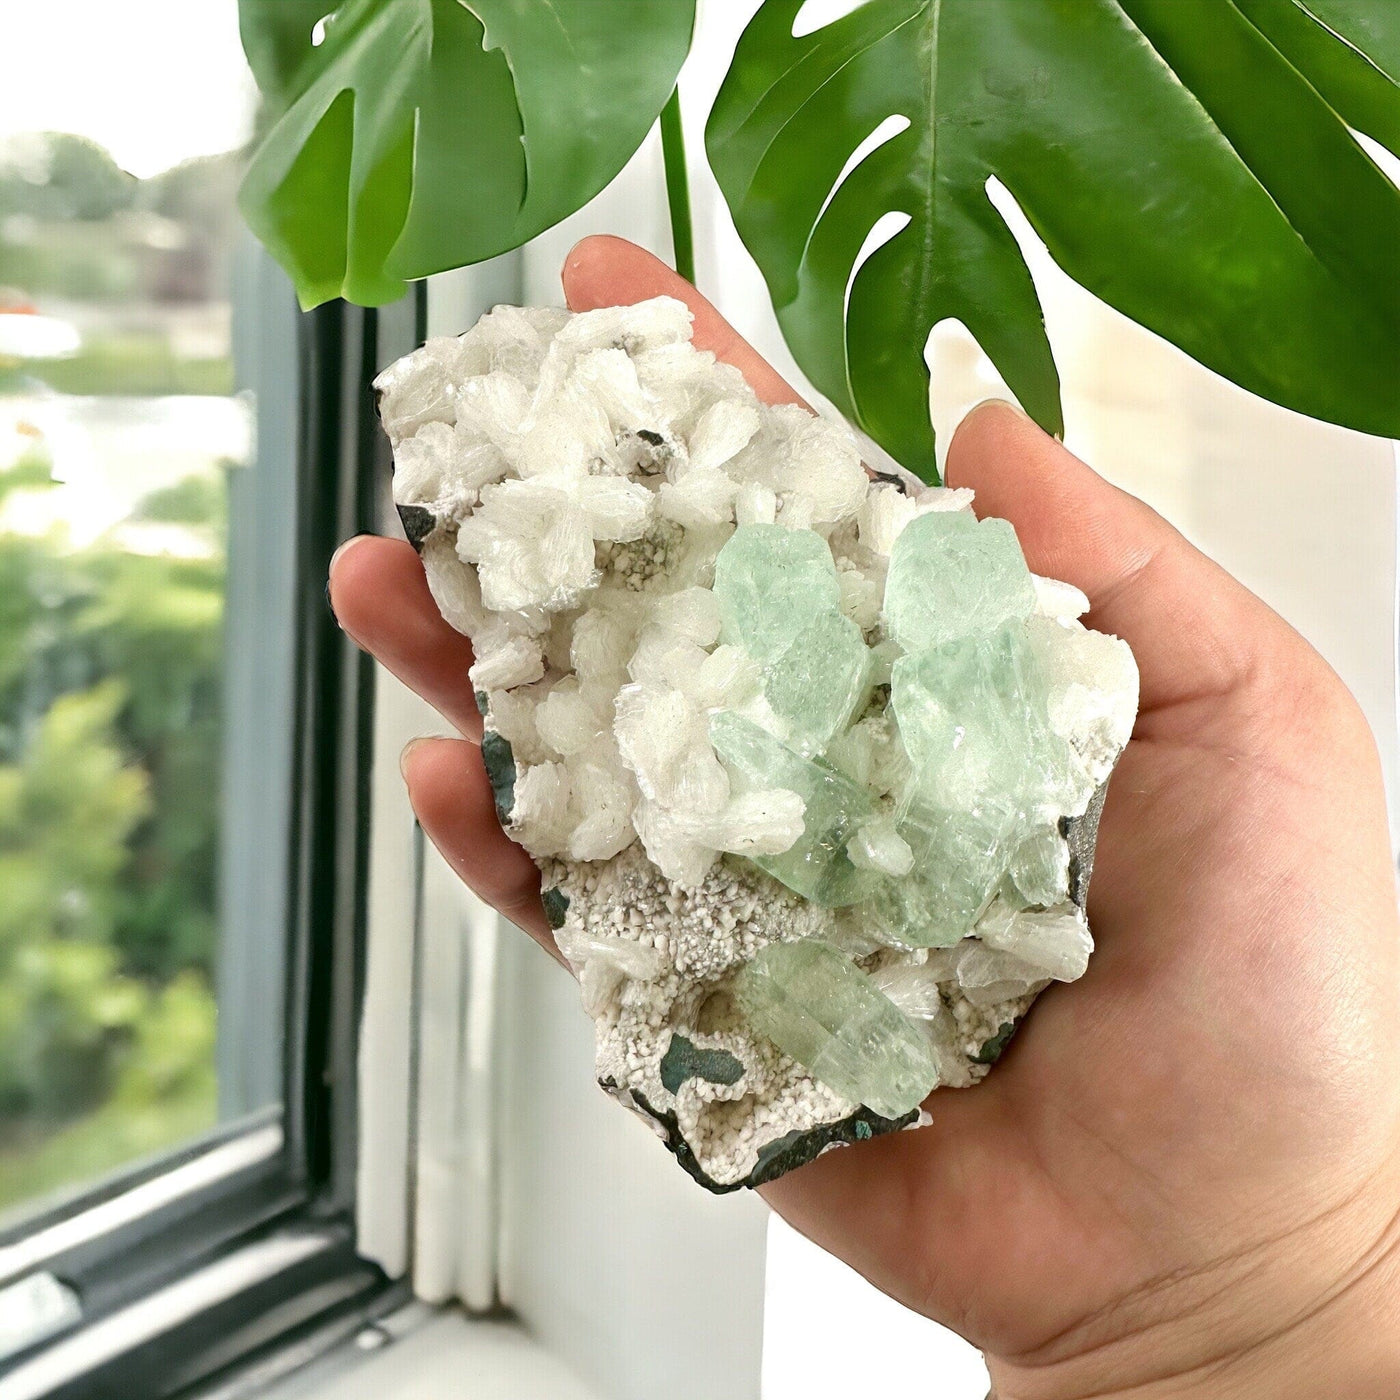 Green Apophyllite Crystals with Stilbite Crystal Specimen in hand for size reference next to window with monstera in background